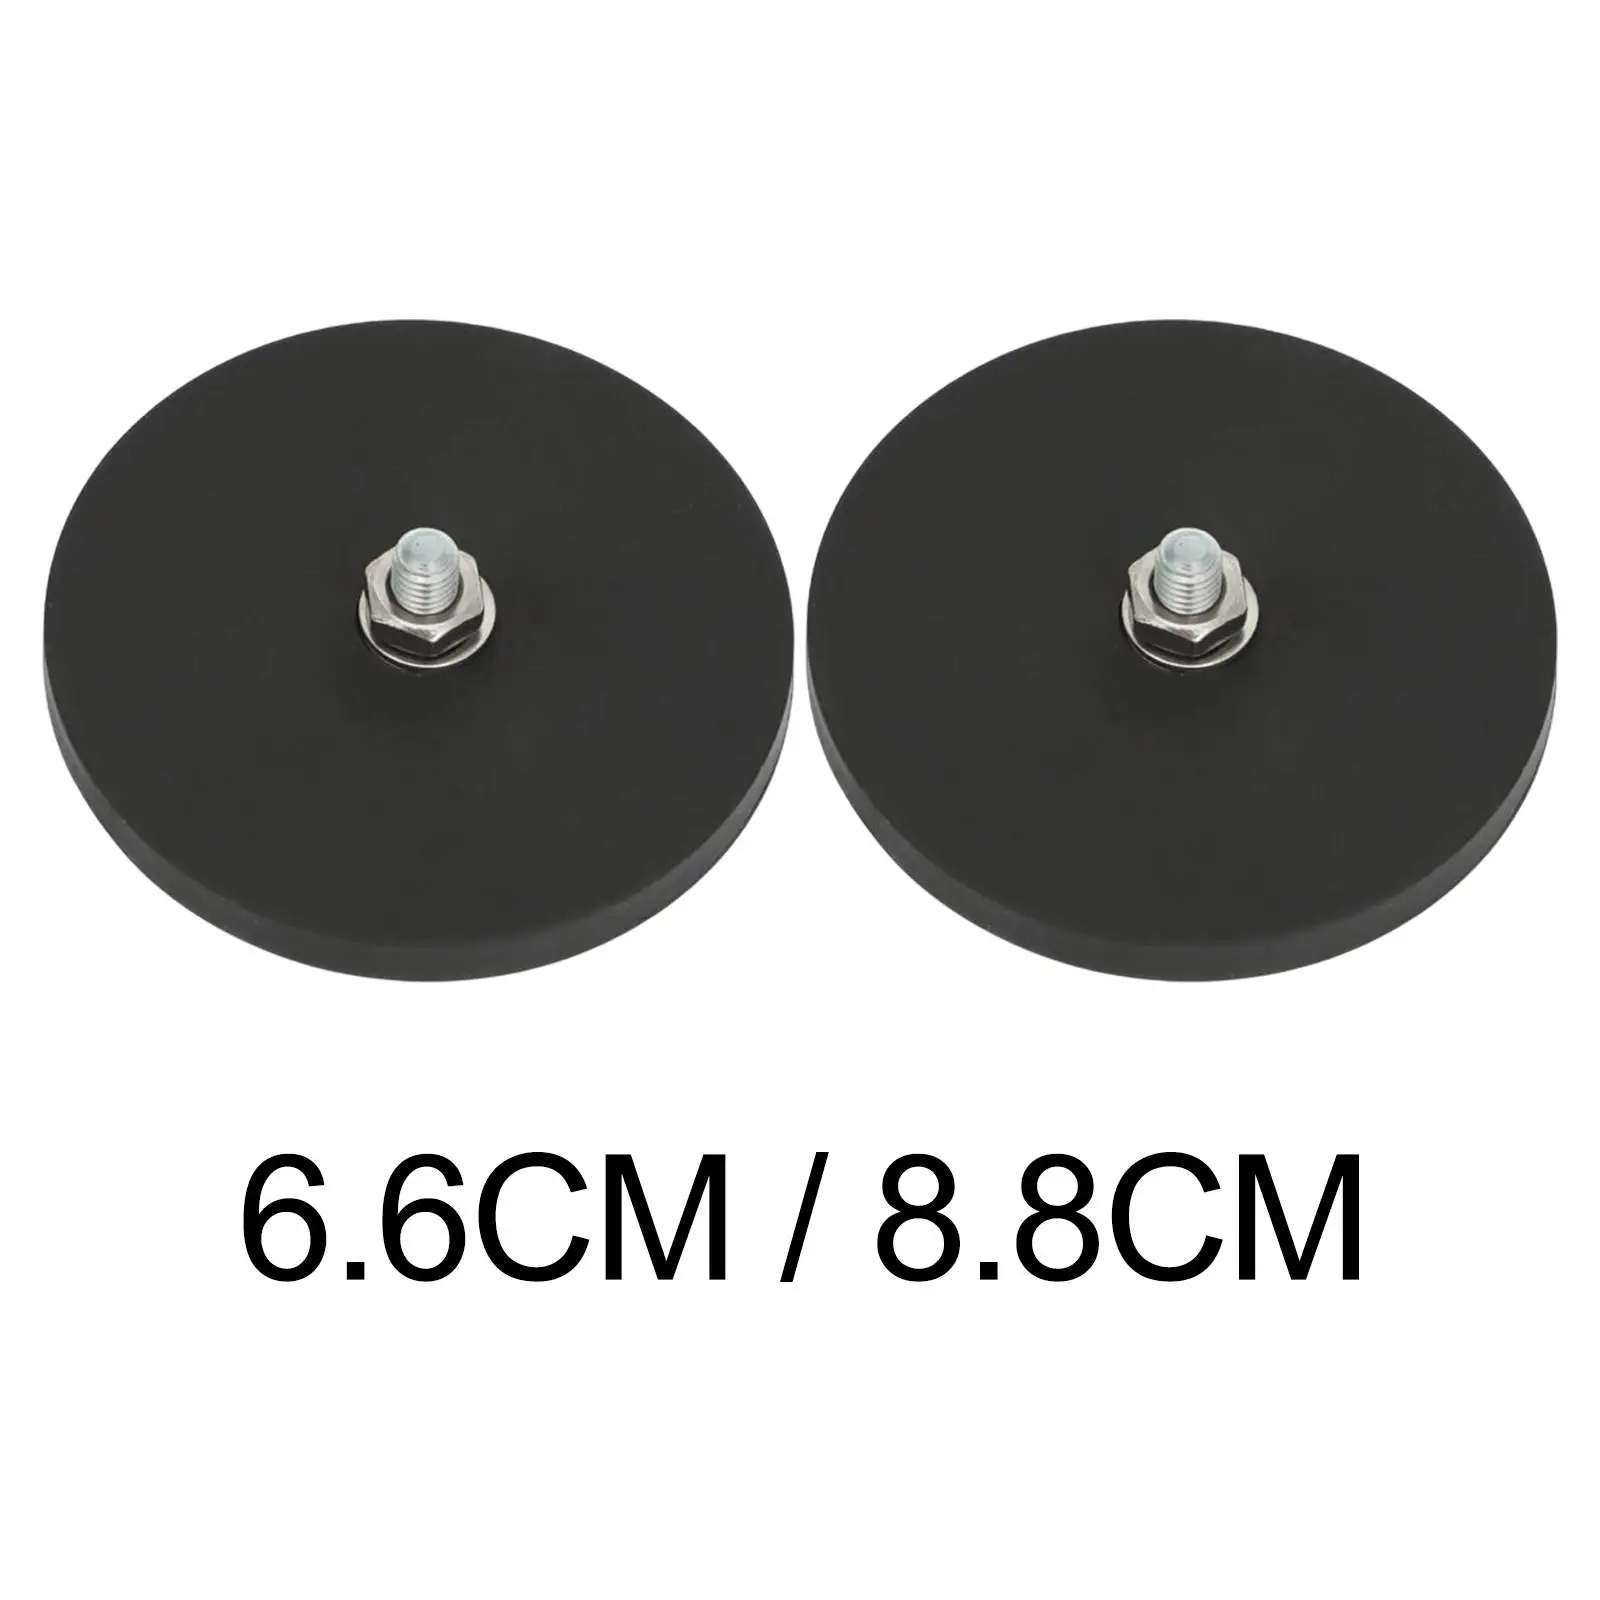 2 Pieces Magnet Mount Holder Work Light Mounting Brackets for Roof Flashlight